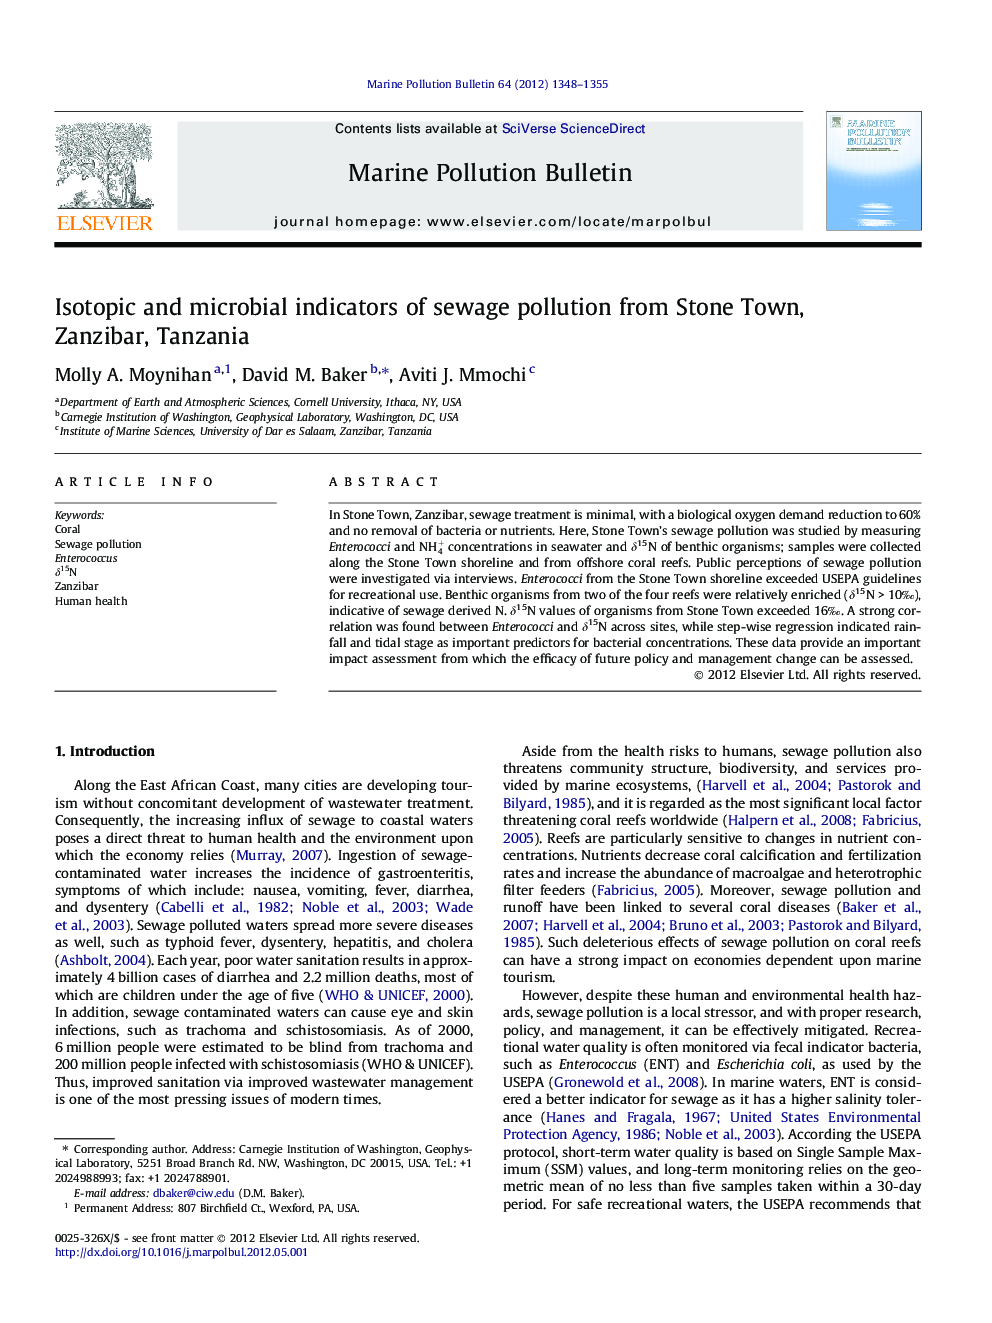 Isotopic and microbial indicators of sewage pollution from Stone Town, Zanzibar, Tanzania